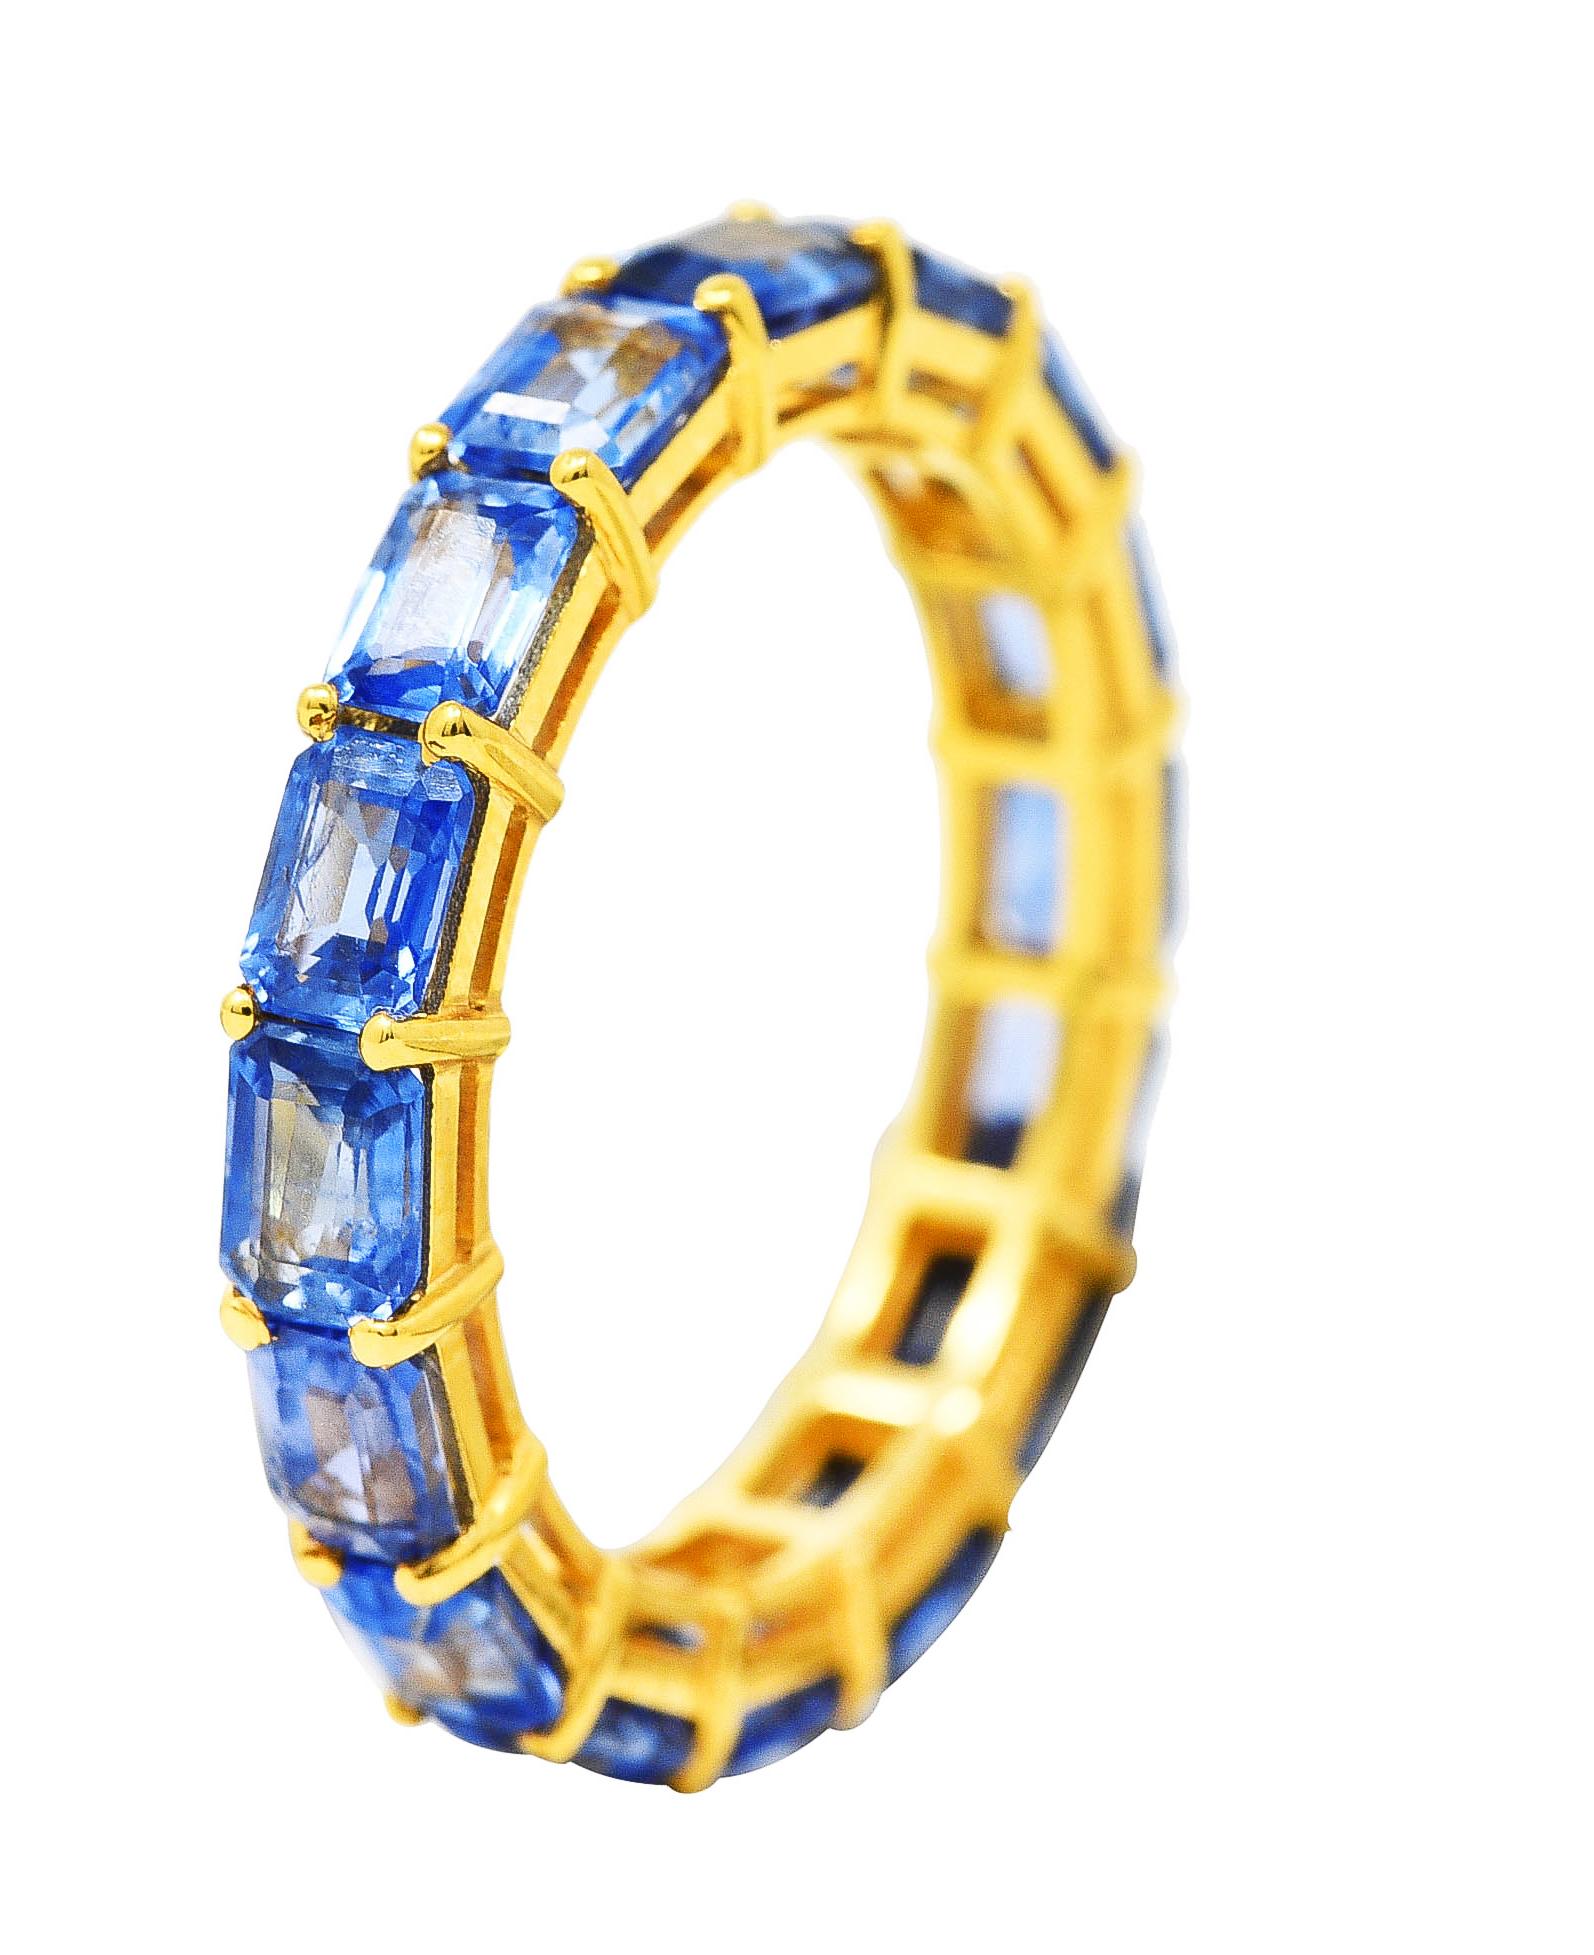 Comprised of emerald cut sapphires prong set East to West in wire baskets fully around. Weighing approximately 4.80 carats total. Transparent light to medium blue in color. Completed by high polished gold finish. Tested as 18 karat gold. Circa;